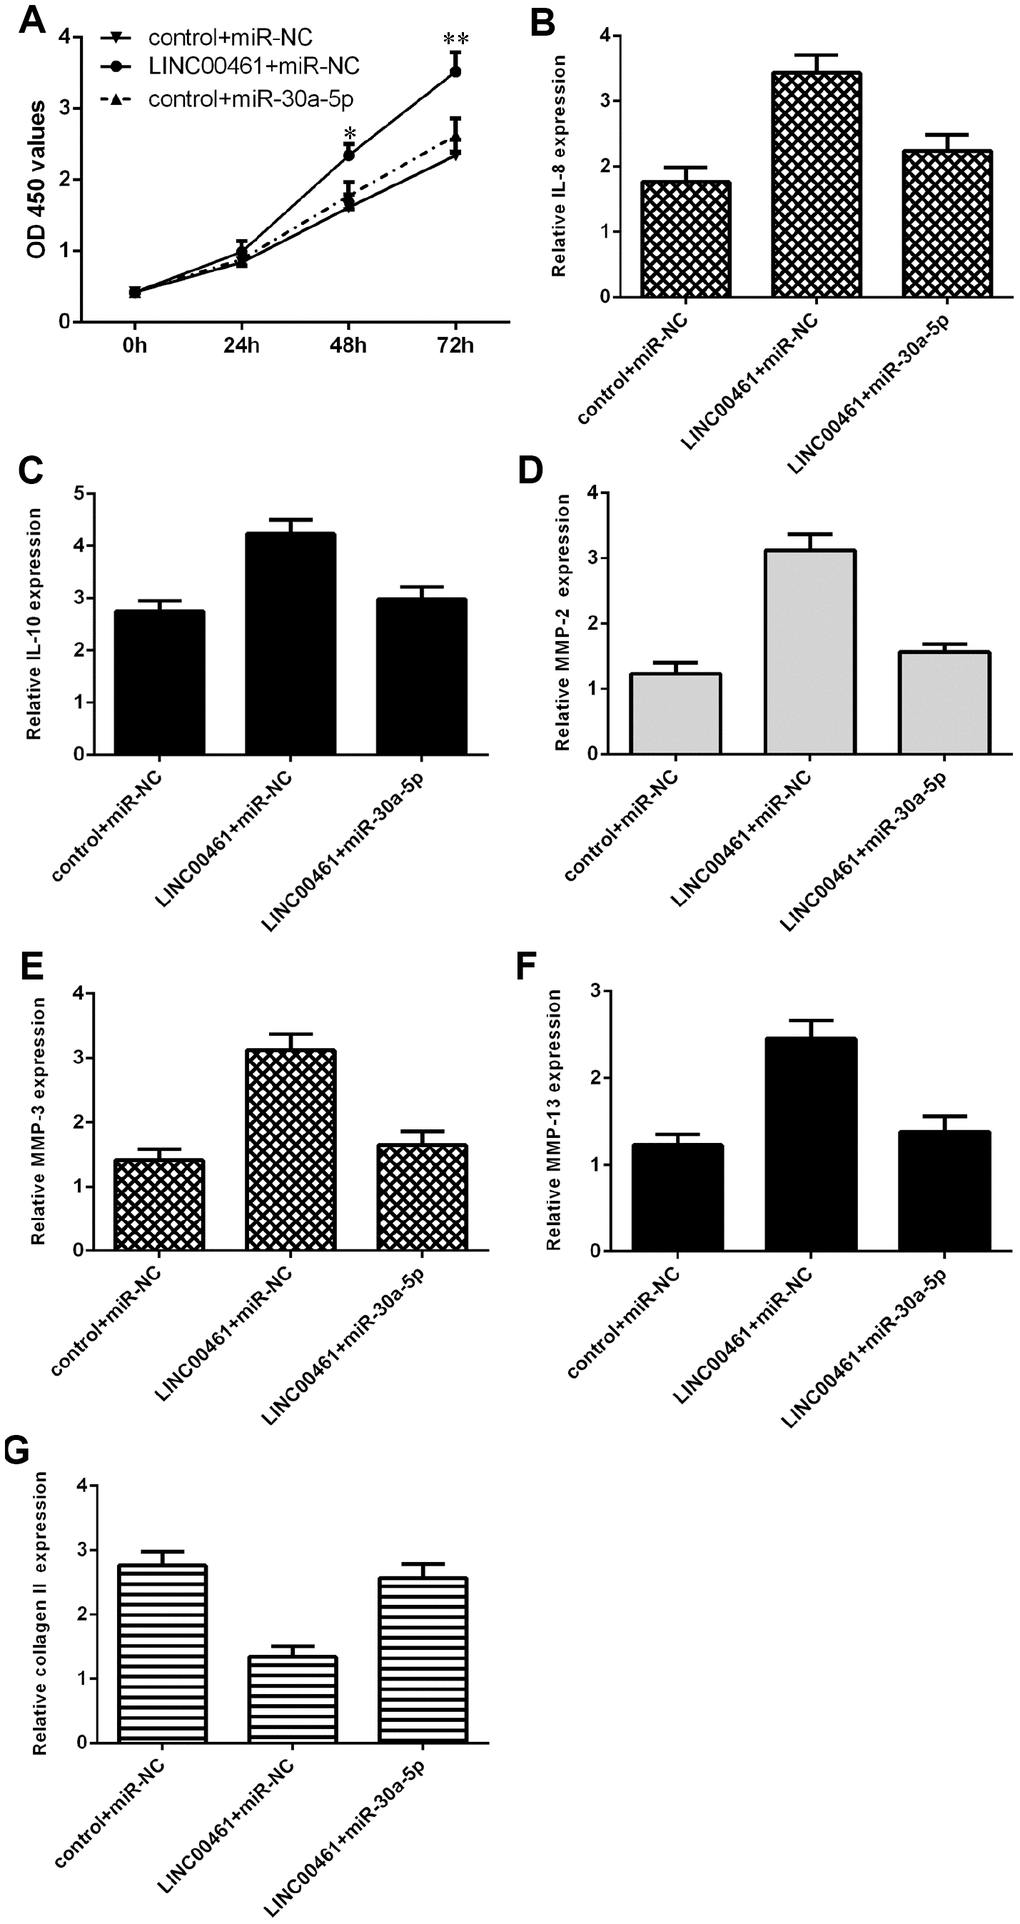 Overexpression of LINC00461 enhanced chondrocyte proliferation, cell cycle progression, inflammation, and ECM degradation by downregulating miR-30a-5p. (A) Cell proliferation was measured by CCK-8 assay. (B) Elevated expression of miR-30a-5p inhibited IL-8 in LINC00461-overexpressing chondrocytes. (C) The expression of IL-10 was determined by qRT-PCR assay. (D) Ectopic expression of miR-30a-5p decreased MMP-2 expression in LINC00461-overexpressing chondrocytes. (E) The expression of MMP-3 was measured by using qRT-PCR assay. (F) The expression of MMP-13 was measured by using qRT-PCR assay. (G) miR-30a-5p overexpression enhanced collagen II expression in LINC00461-overexpressing chondrocytes. *p